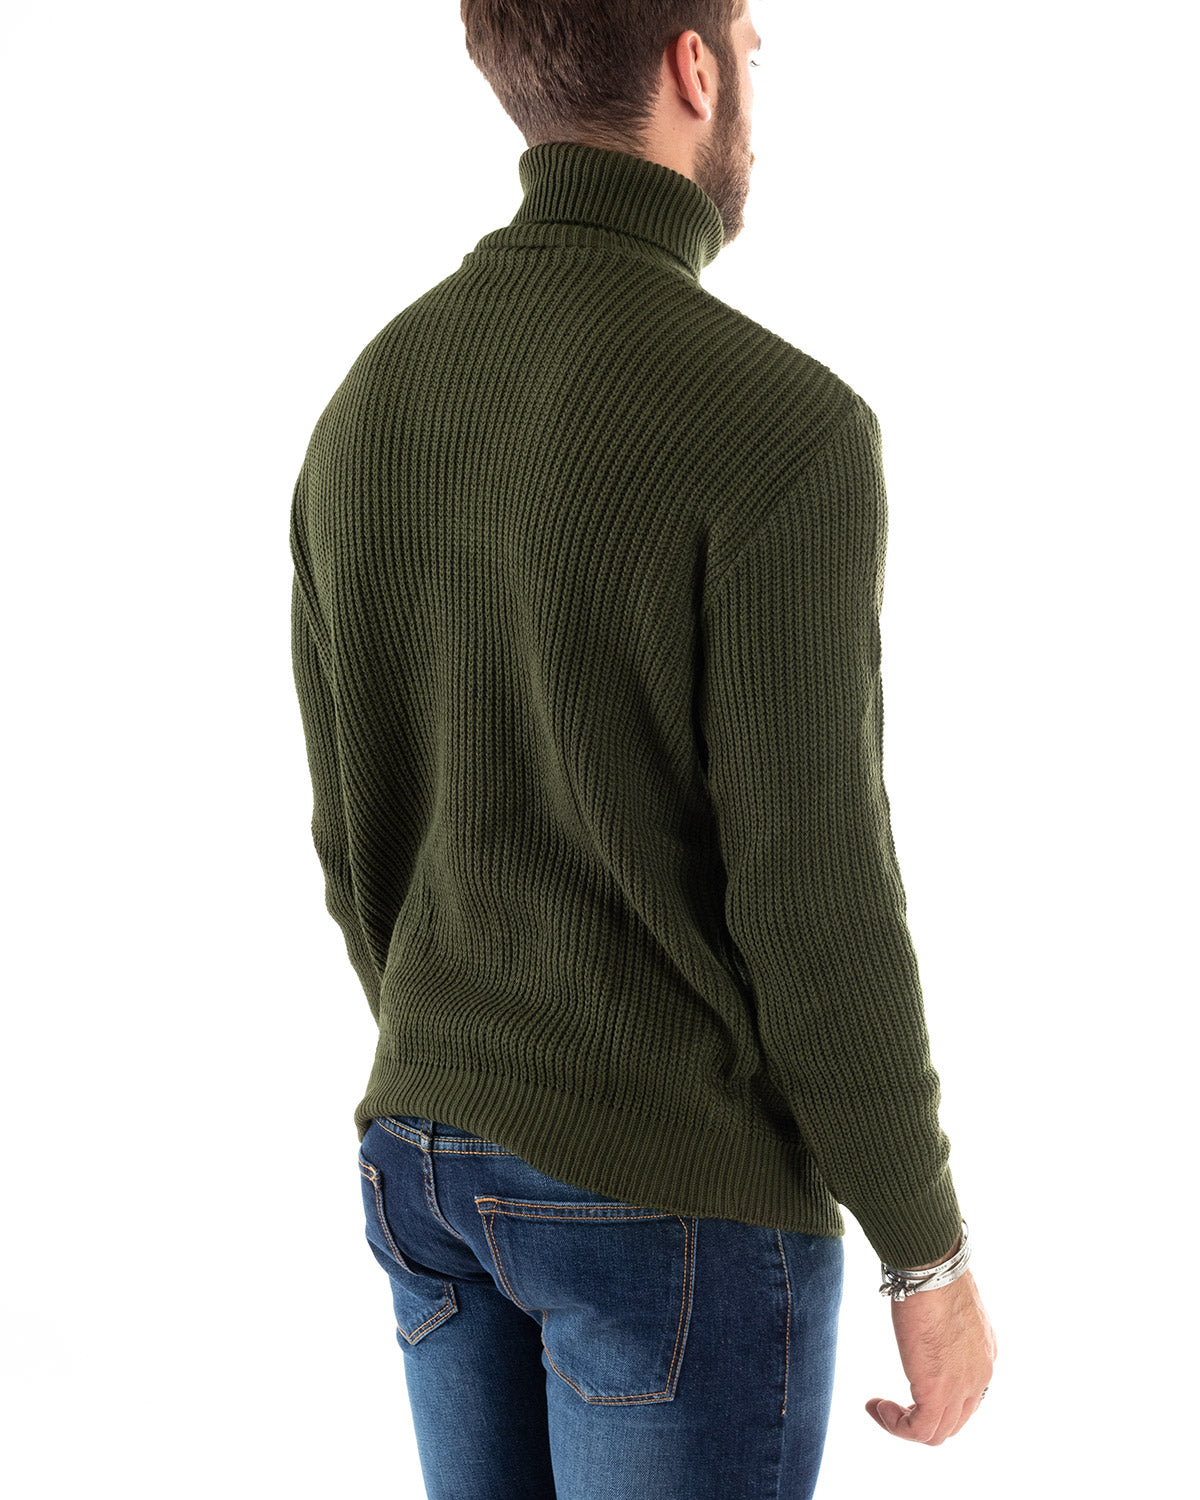 Paul Barrell Men's Pullover Sweater Solid Color Military Green High Neck Casual GIOSAL M2355A